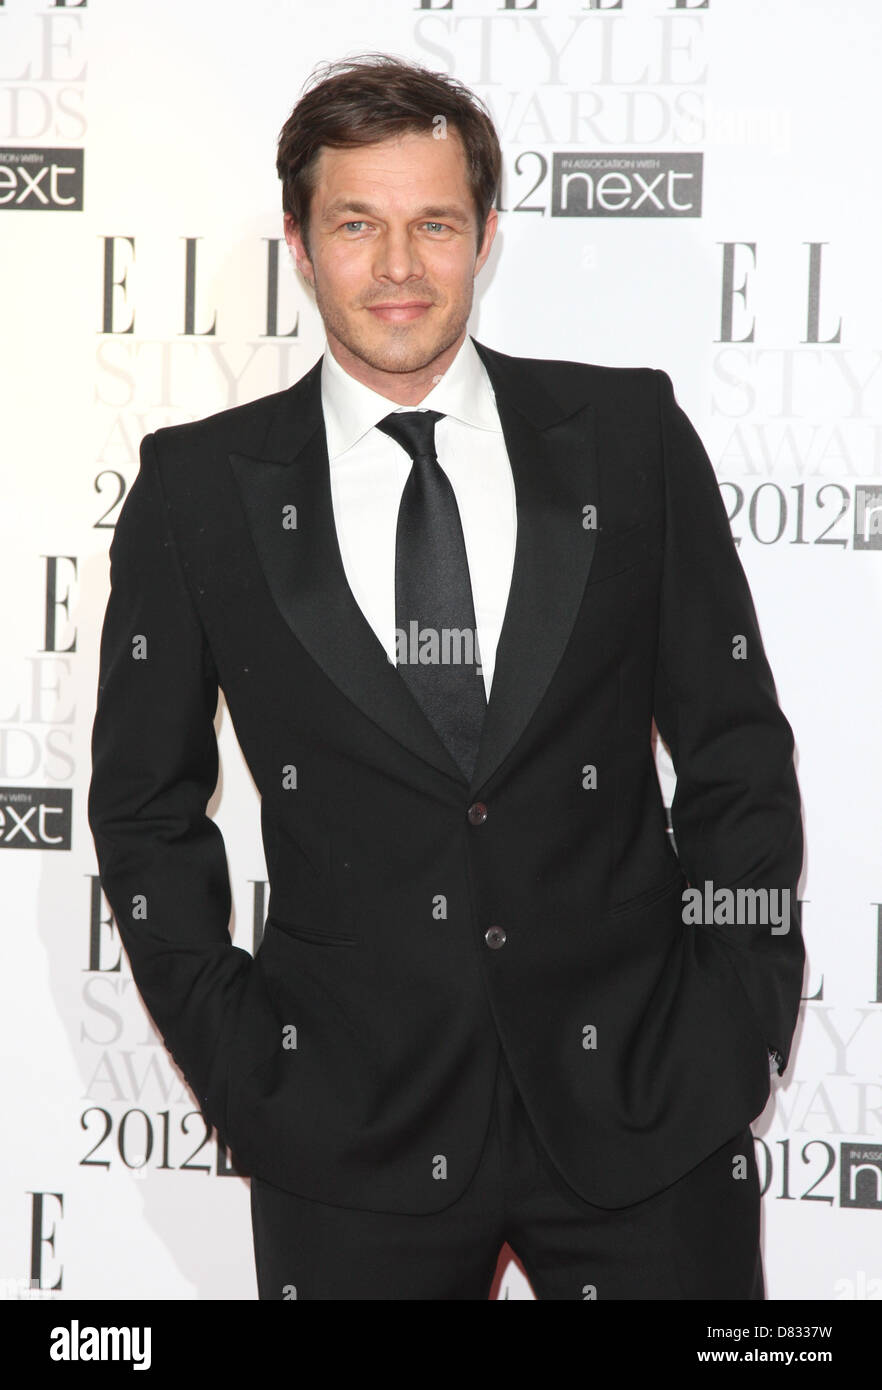 Paul Sculfor The Elle Style Awards 2012 held at The Savoy -Arrivals London, England - 13.02.12 Stock Photo